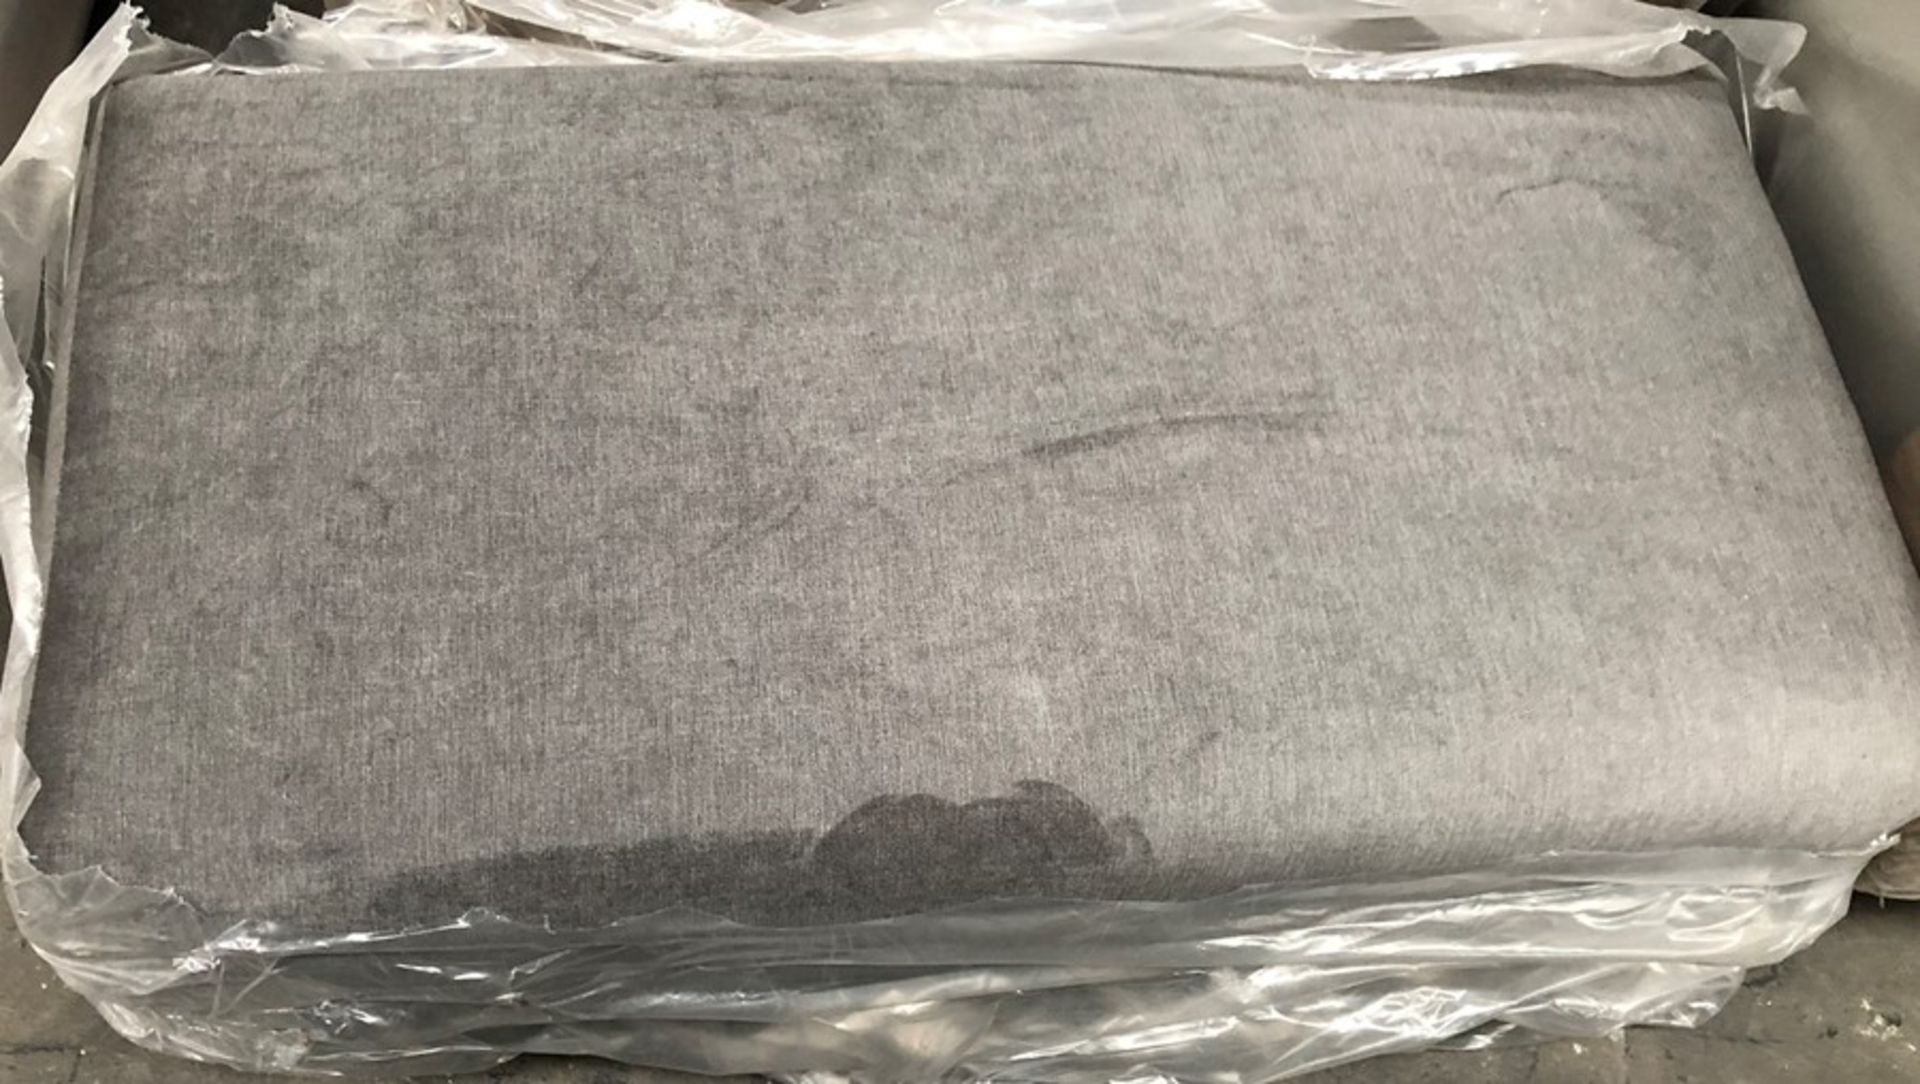 1 BRAND NEW BAGGED BOSTON PLAIN FOOTSTOOL IN DARK GREY (VIEWING HIGHLY RECOMMENDED)